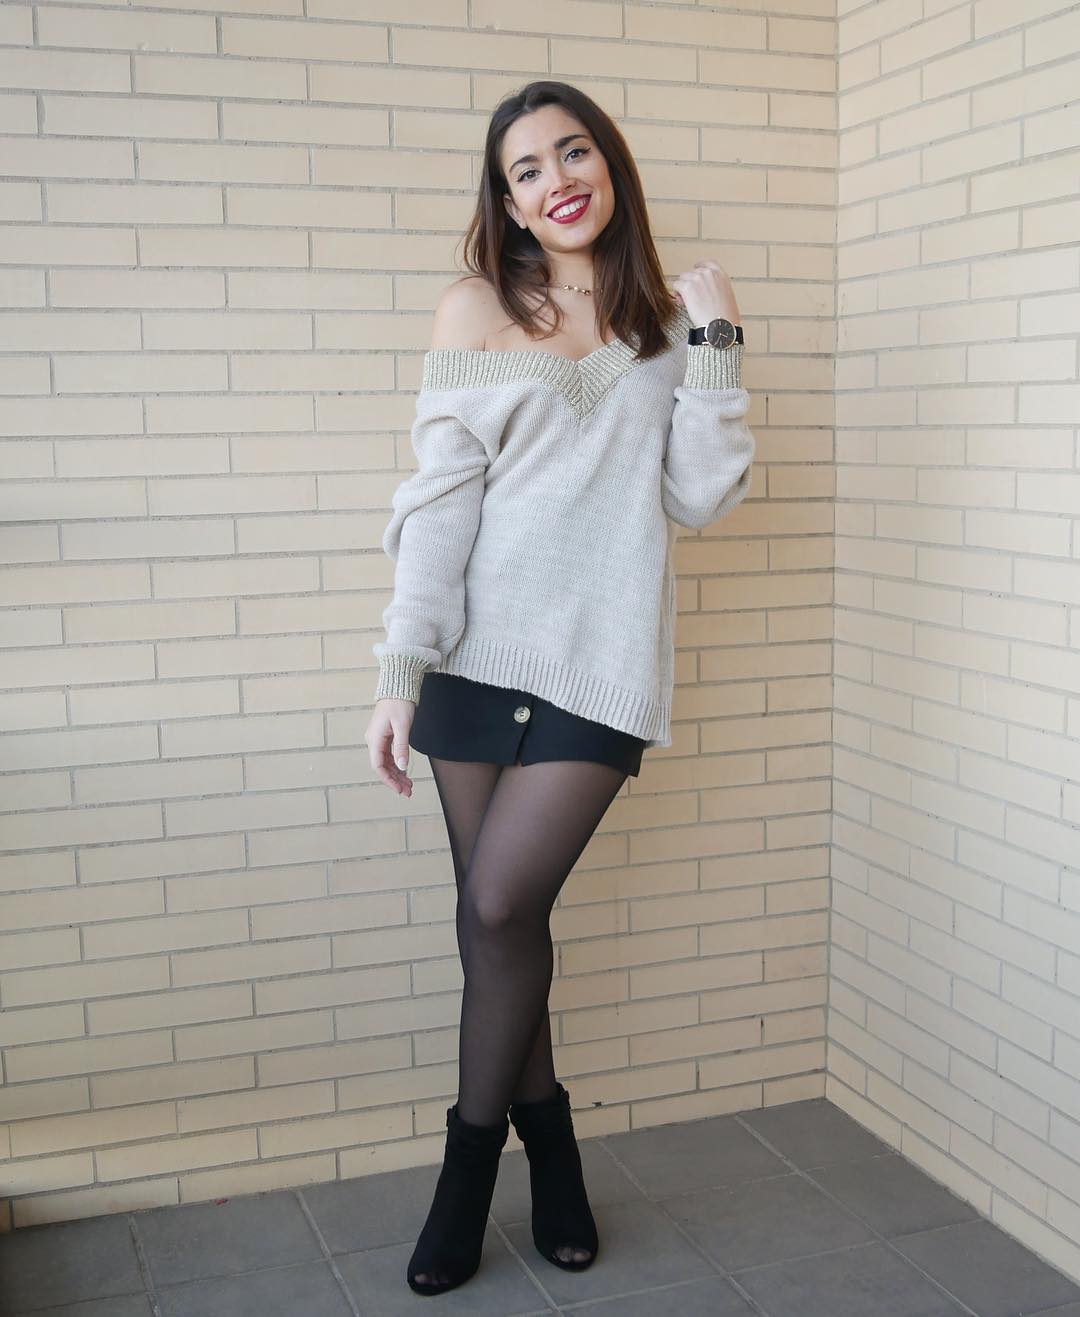 Total looks - Fashionmylegs : The tights and hosiery blog